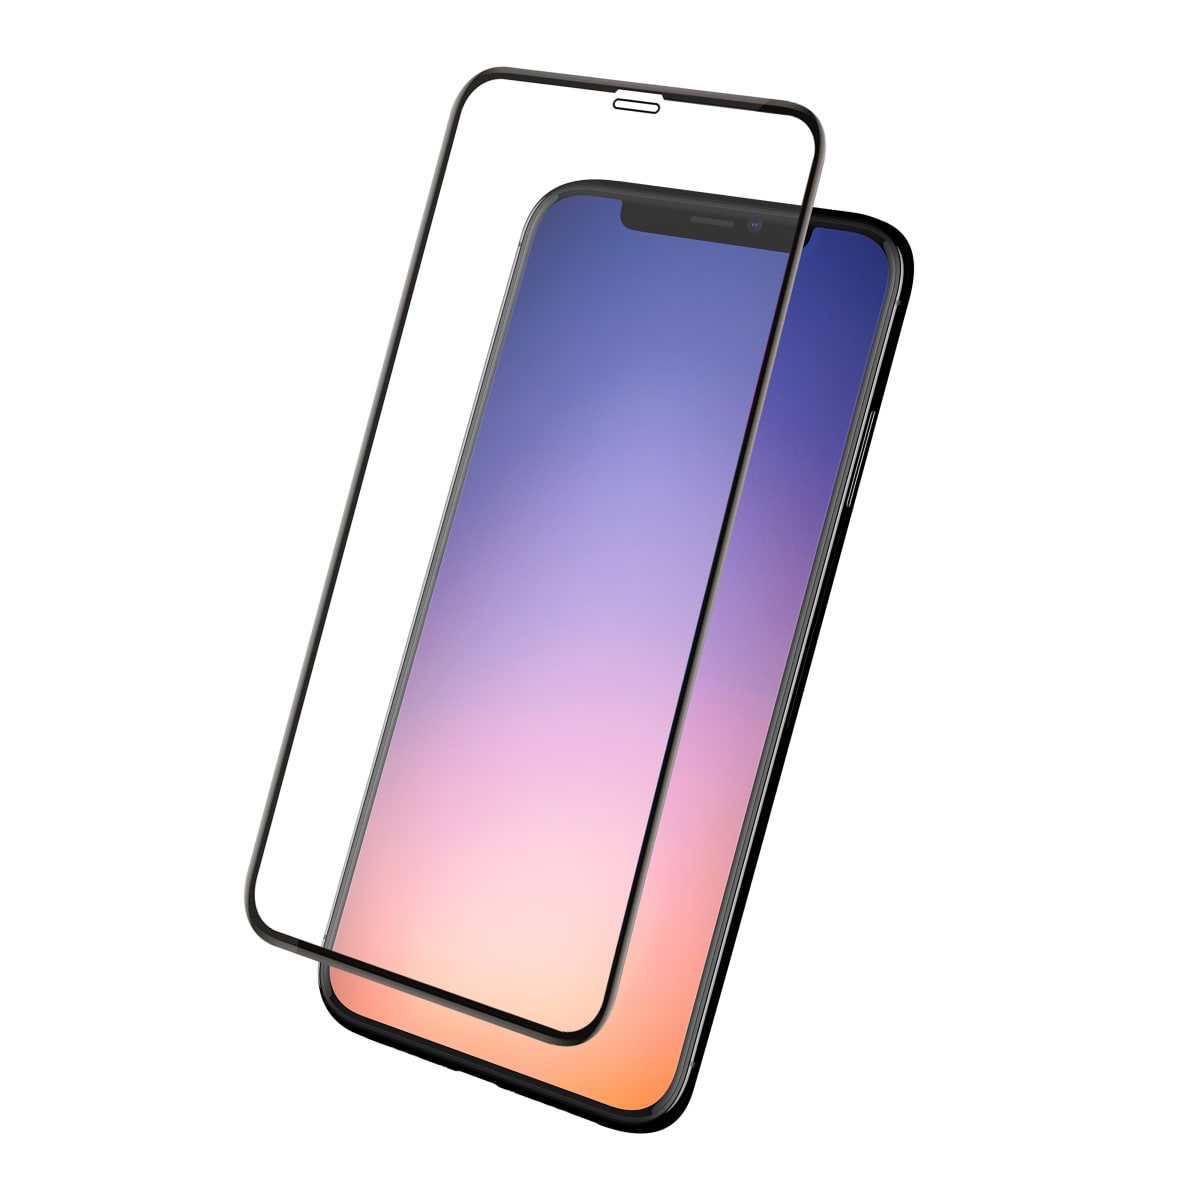 Full glass protection for iPhone 11 Pro